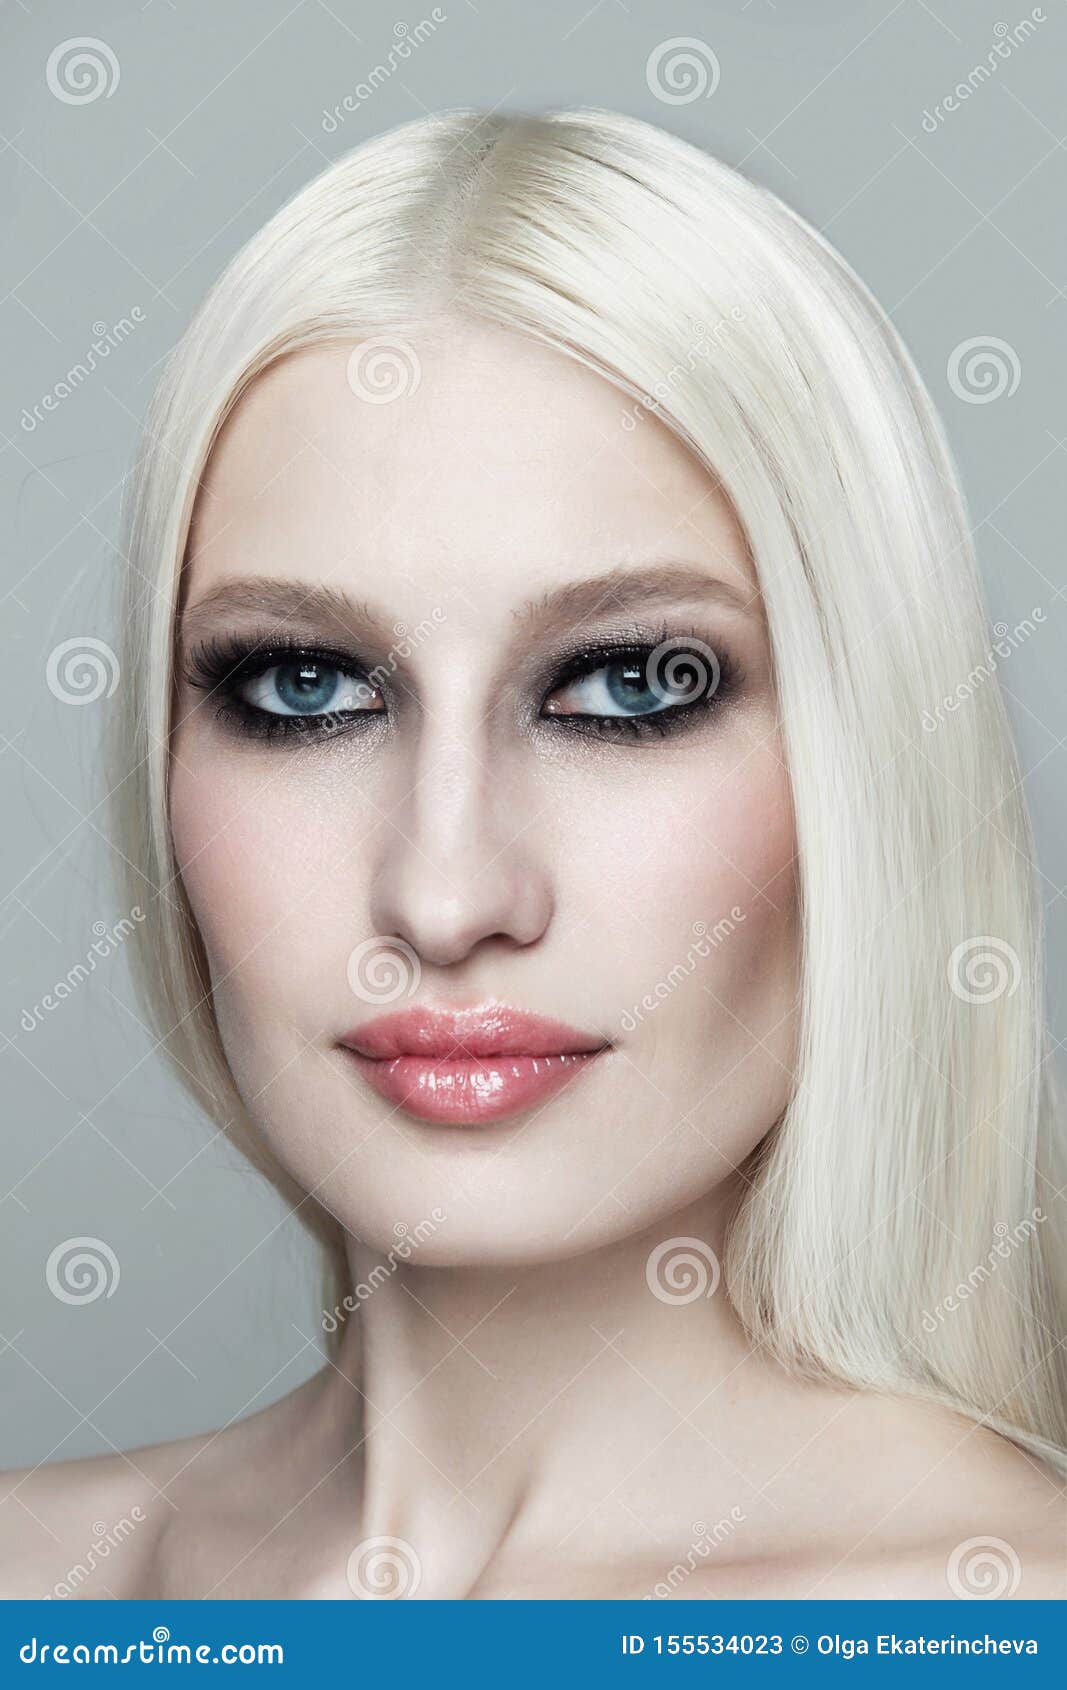 Young Blonde Woman with Smoky Eye Makeup Stock Image - Image of female ...